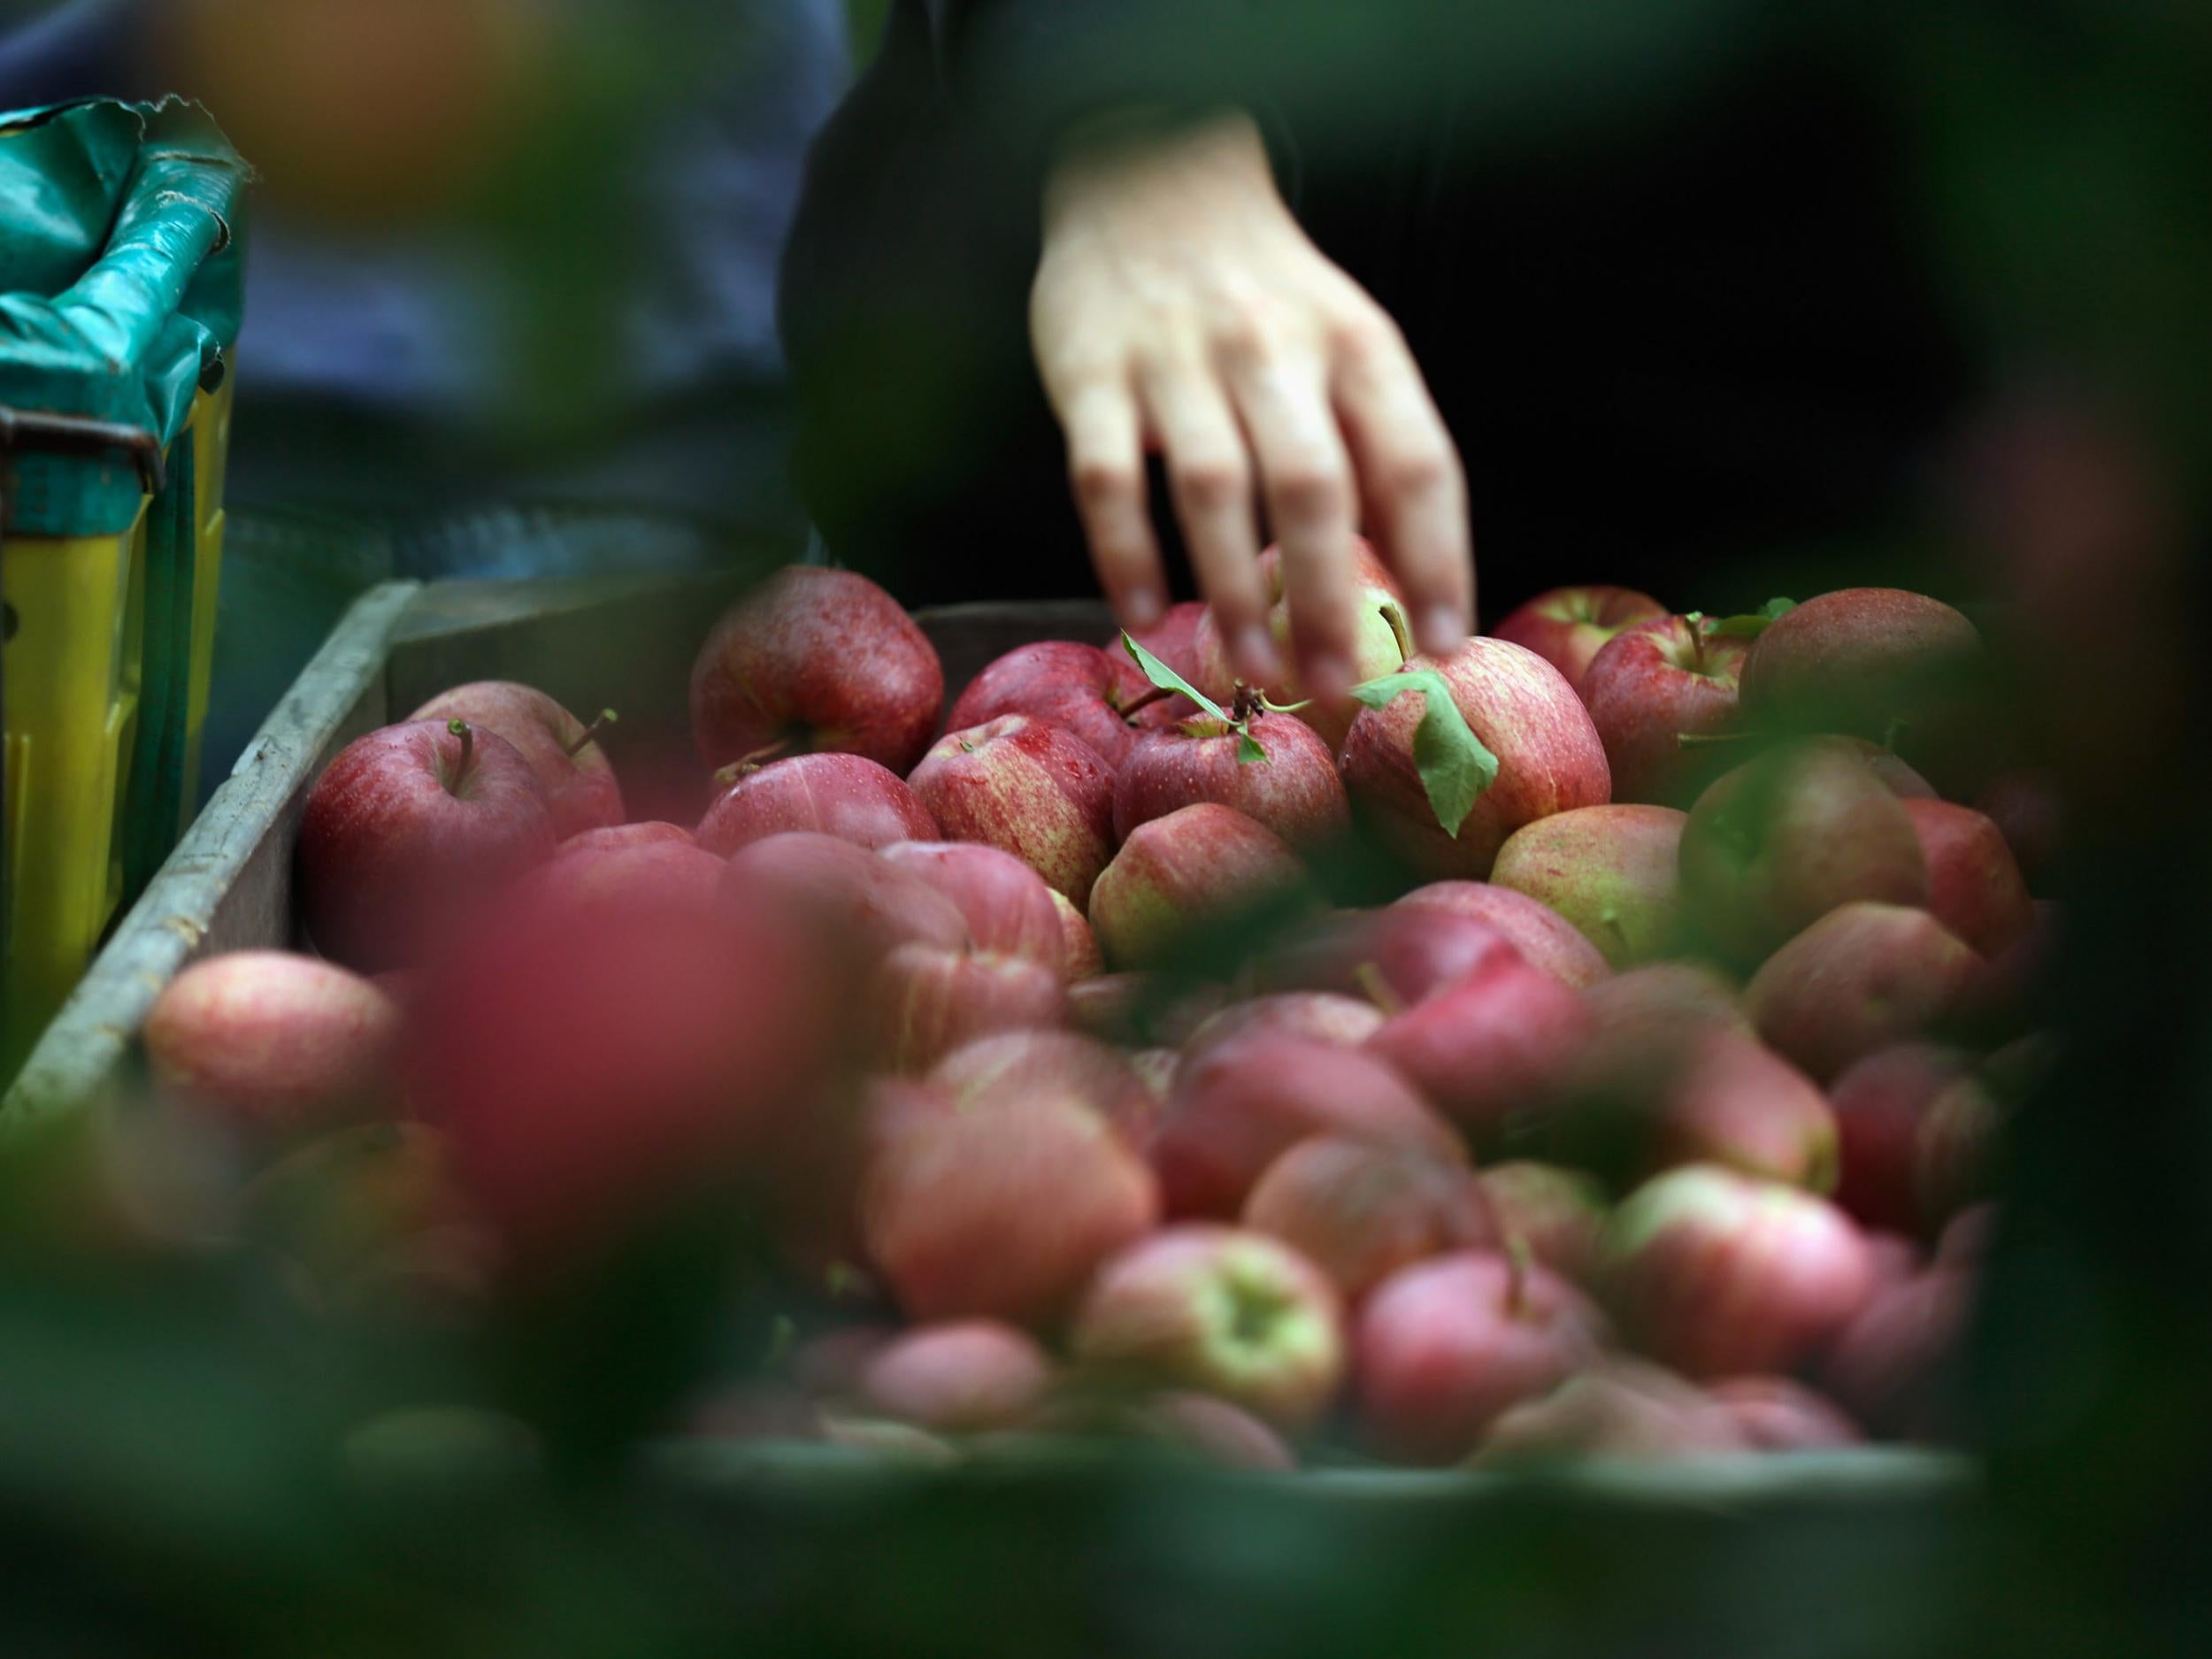 The Royal Horticultural Society said it was expecting its best ever apple crop this summer